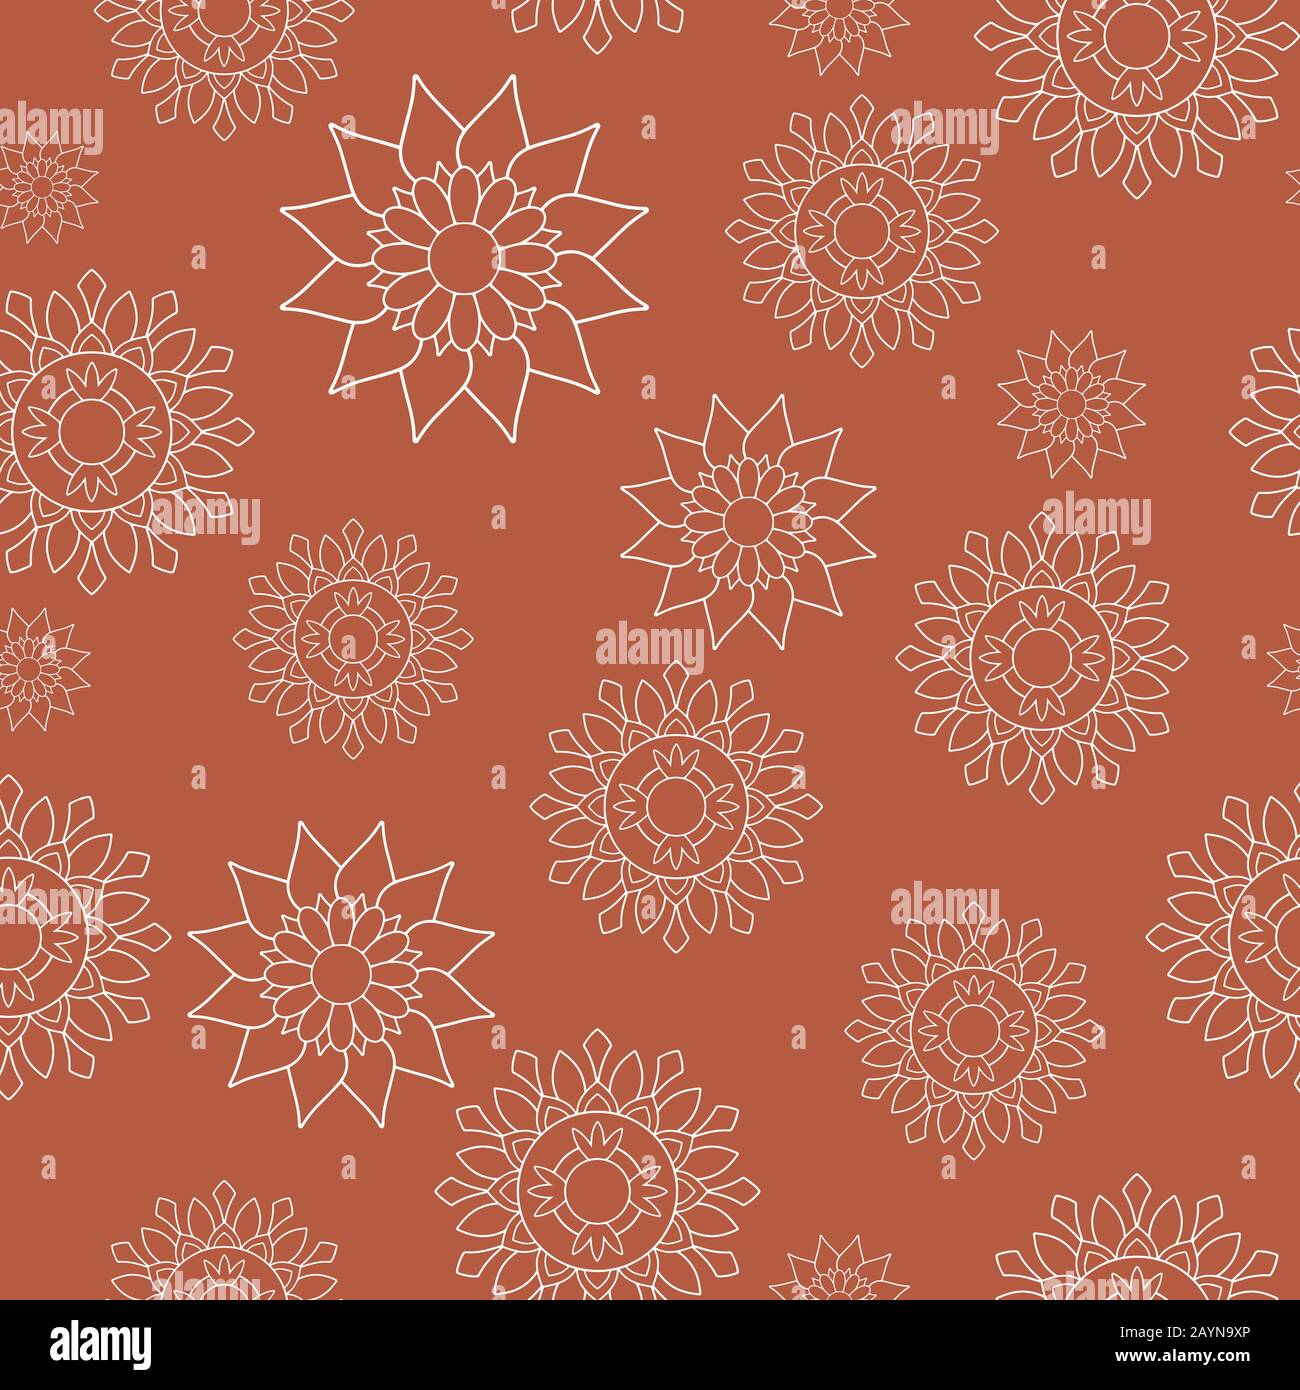 Seamless repeat pattern, eastern style. White floral mandalas on orange background. Oriental decorative motifs perfect for printing on fabric or paper. Stock Vector